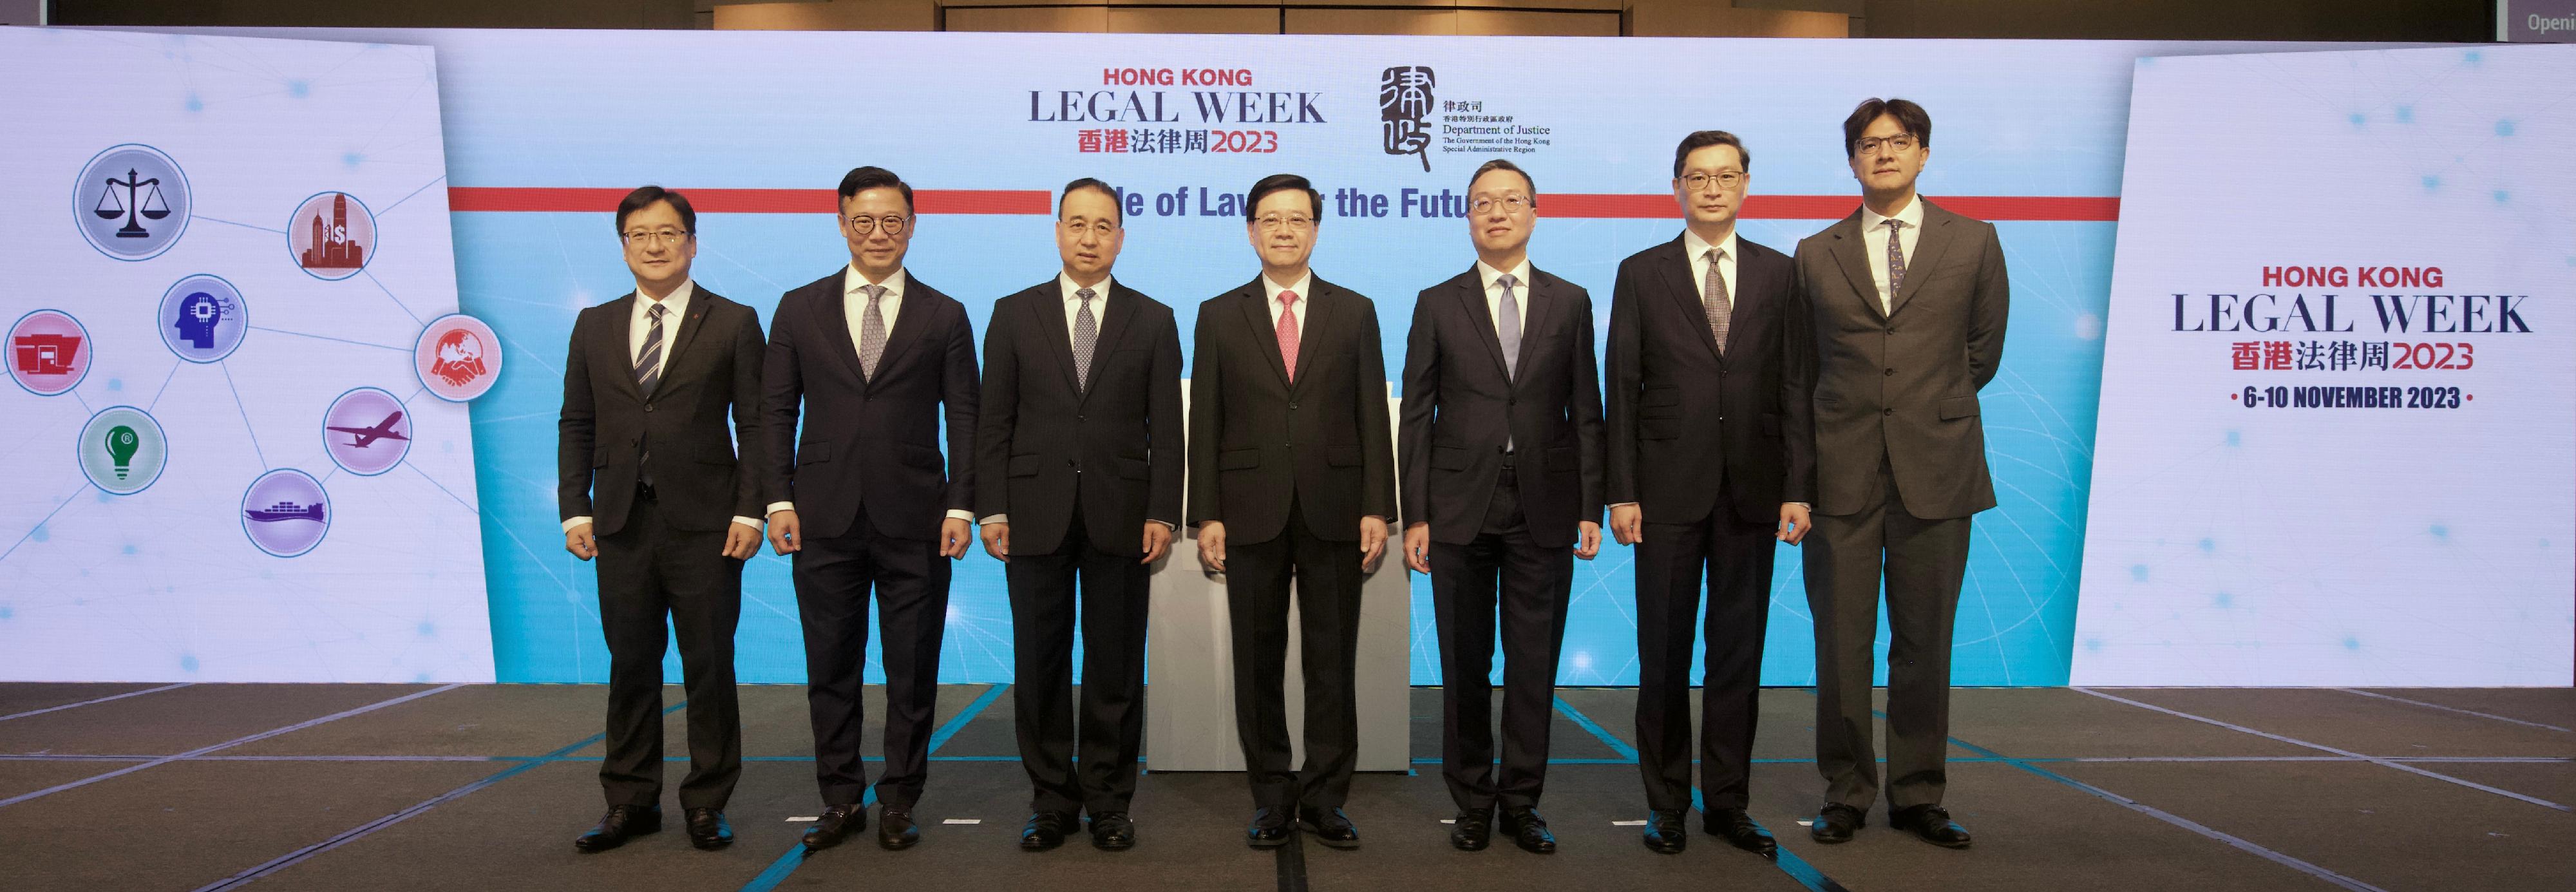 The Chief Executive, Mr John Lee, attended the Hong Kong Legal Week 2023: Rule of Law for the Future this morning (November 10). Photo shows (from left) the President of the Law Society of Hong Kong, Mr Chan Chak-ming; the Deputy Secretary for Justice, Mr Cheung Kwok-kwan; Deputy Director of the Liaison Office of the Central People's Government in the Hong Kong Special Administrative Region Mr Liu Guangyuan; Mr Lee; the Secretary for Justice, Mr Paul Lam, SC; the Chief Judge of the High Court, Mr Justice Jeremy Poon Shiu-chor; and Vice-Chairman of the Hong Kong Bar Association Mr José-Antonio Maurellet, SC at the event.